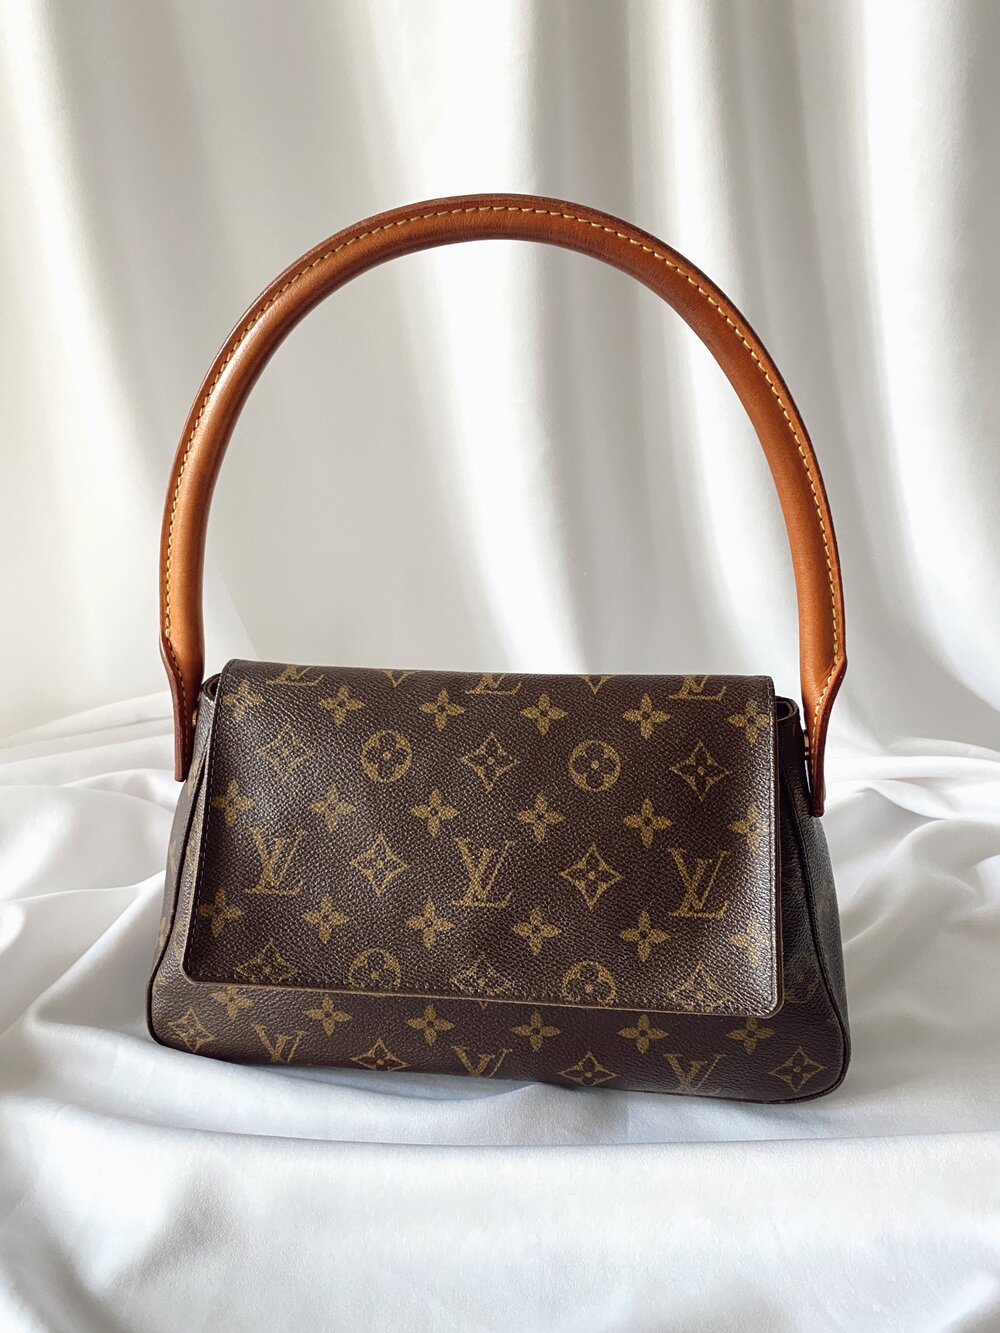 Shop for Louis Vuitton Monogram Canvas Leather Mini Looping Bag - Shipped  from USA